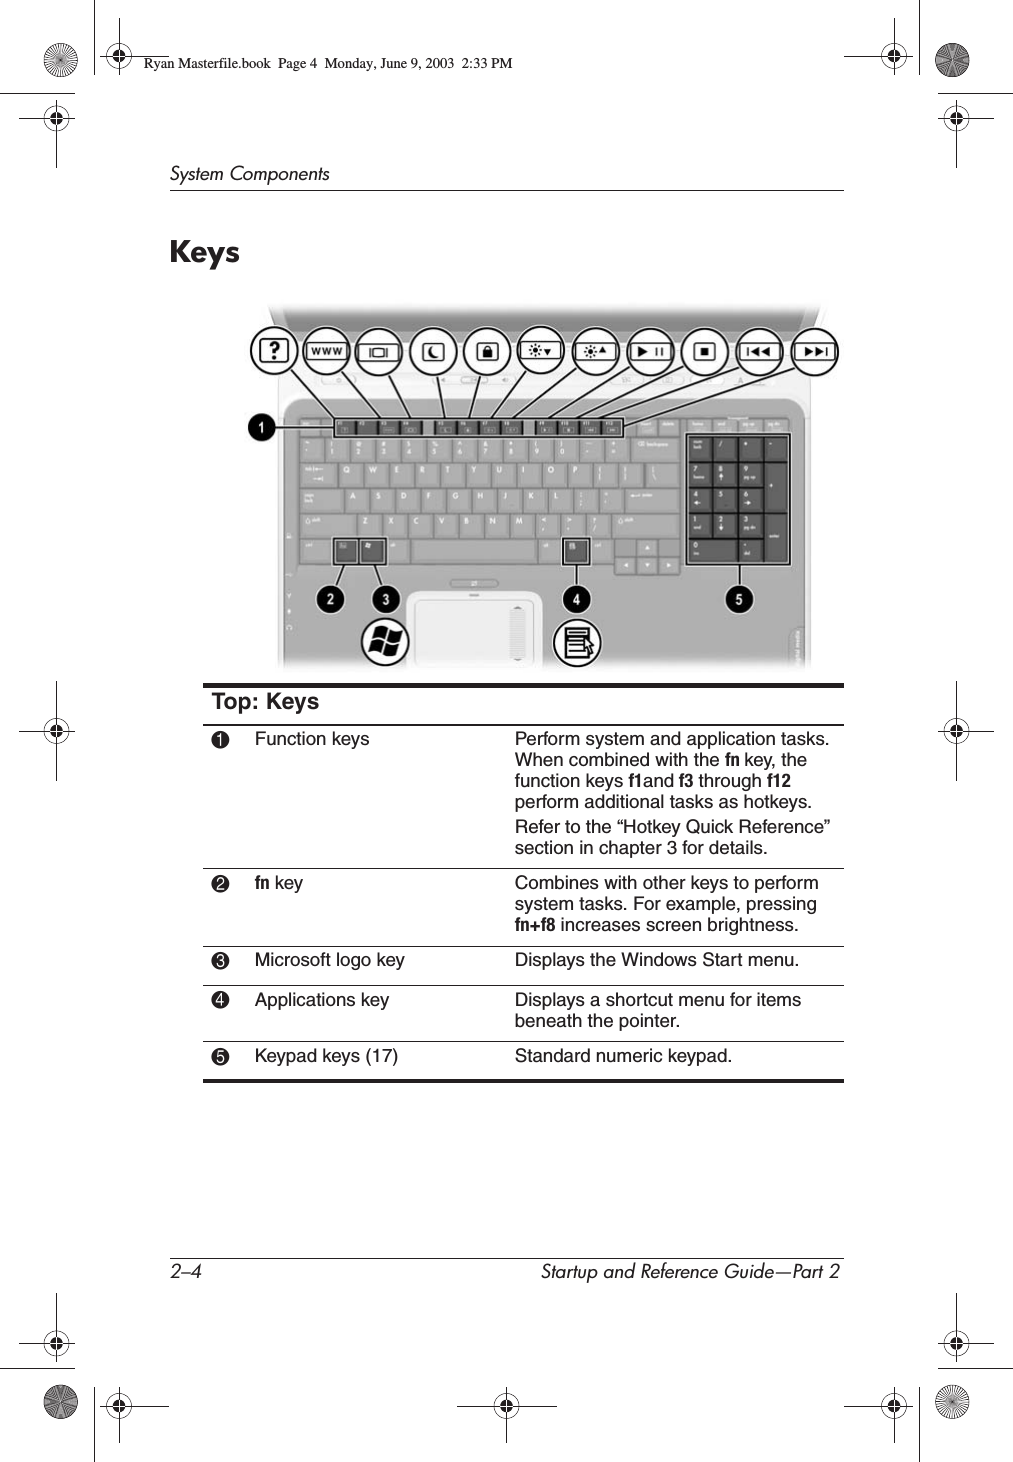 2–4 Startup and Reference Guide—Part 2System ComponentsKeysTop: Keys1Function keys Perform system and application tasks. When combined with the fn key, the function keys f1and f3 through f12perform additional tasks as hotkeys.Refer to the “Hotkey Quick Reference” section in chapter 3 for details.2fn key Combines with other keys to perform system tasks. For example, pressing fn+f8 increases screen brightness.3Microsoft logo key Displays the Windows Start menu.4Applications key Displays a shortcut menu for items beneath the pointer.5Keypad keys (17) Standard numeric keypad.Ryan Masterfile.book  Page 4  Monday, June 9, 2003  2:33 PM